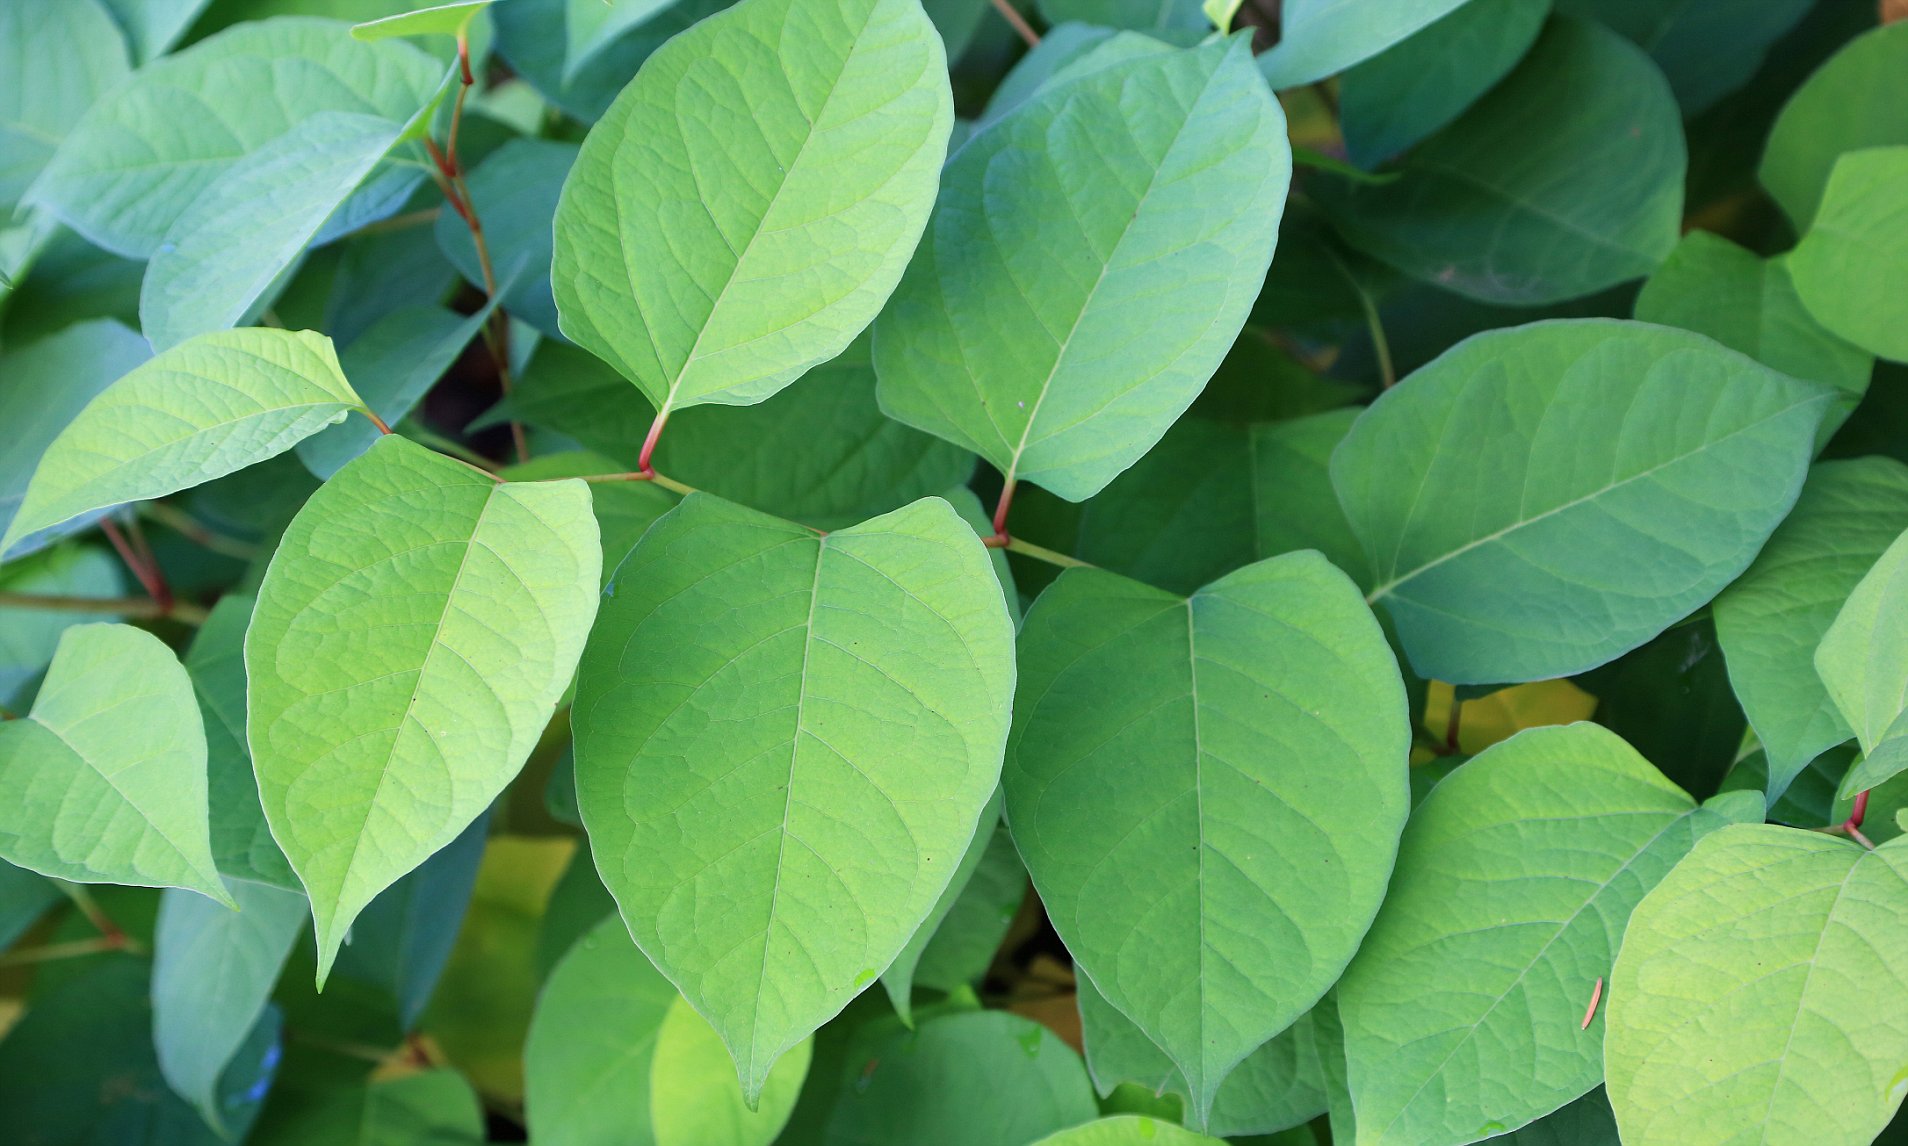 RICS SAY THAT JAPANESE KNOTWEED “IS NOT A DEATH SENTENCE FOR HOMES”